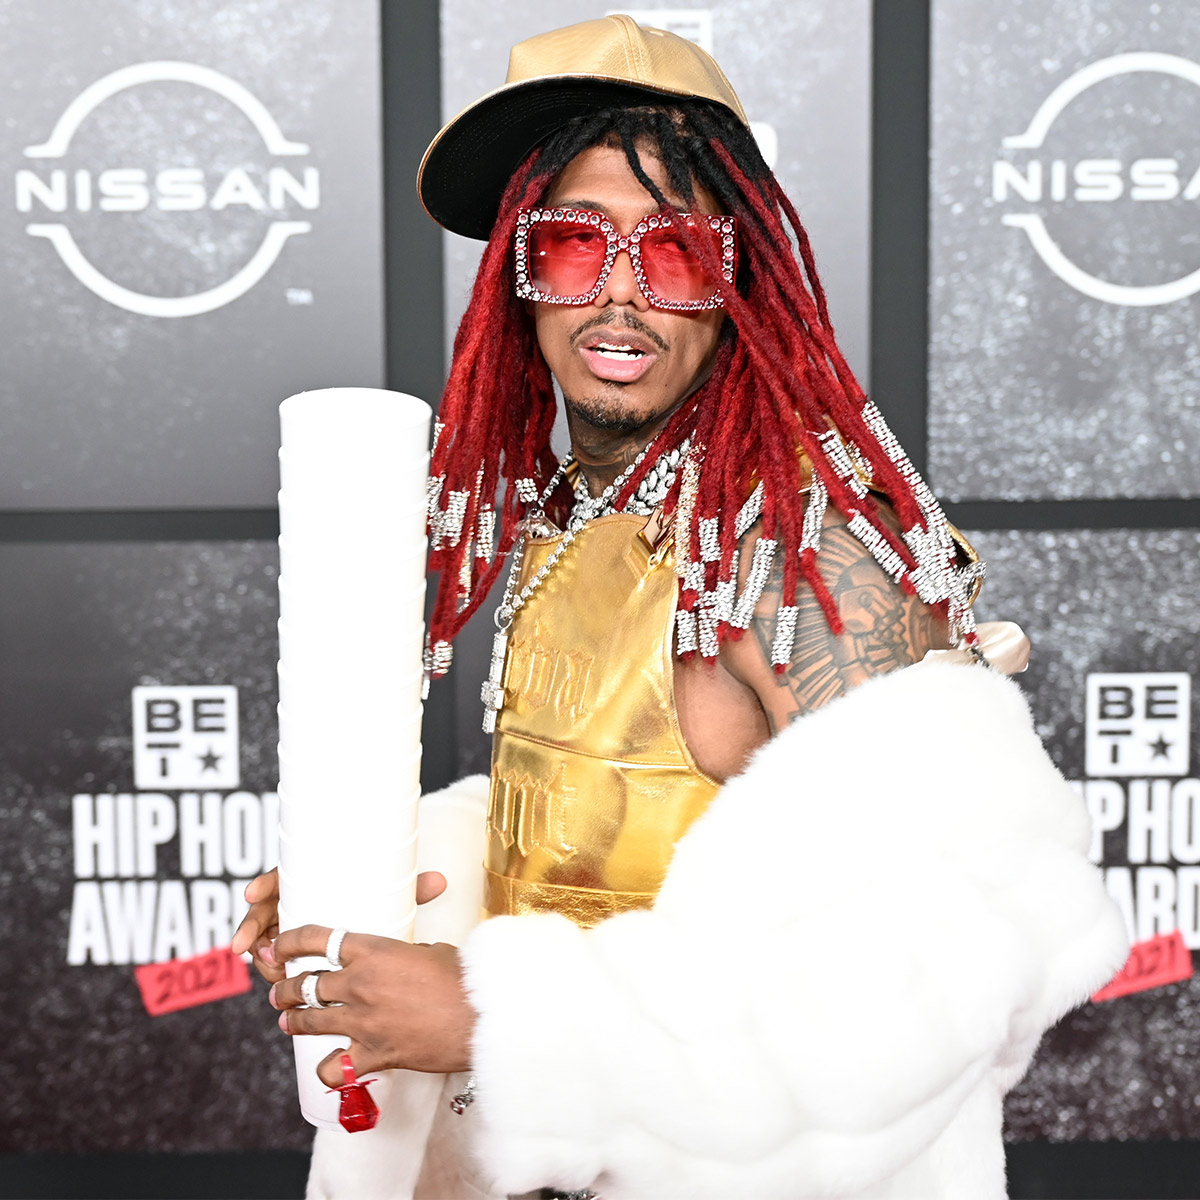 Nick Cannon wears 'tacky' bathrobe and Crocs on red carpet